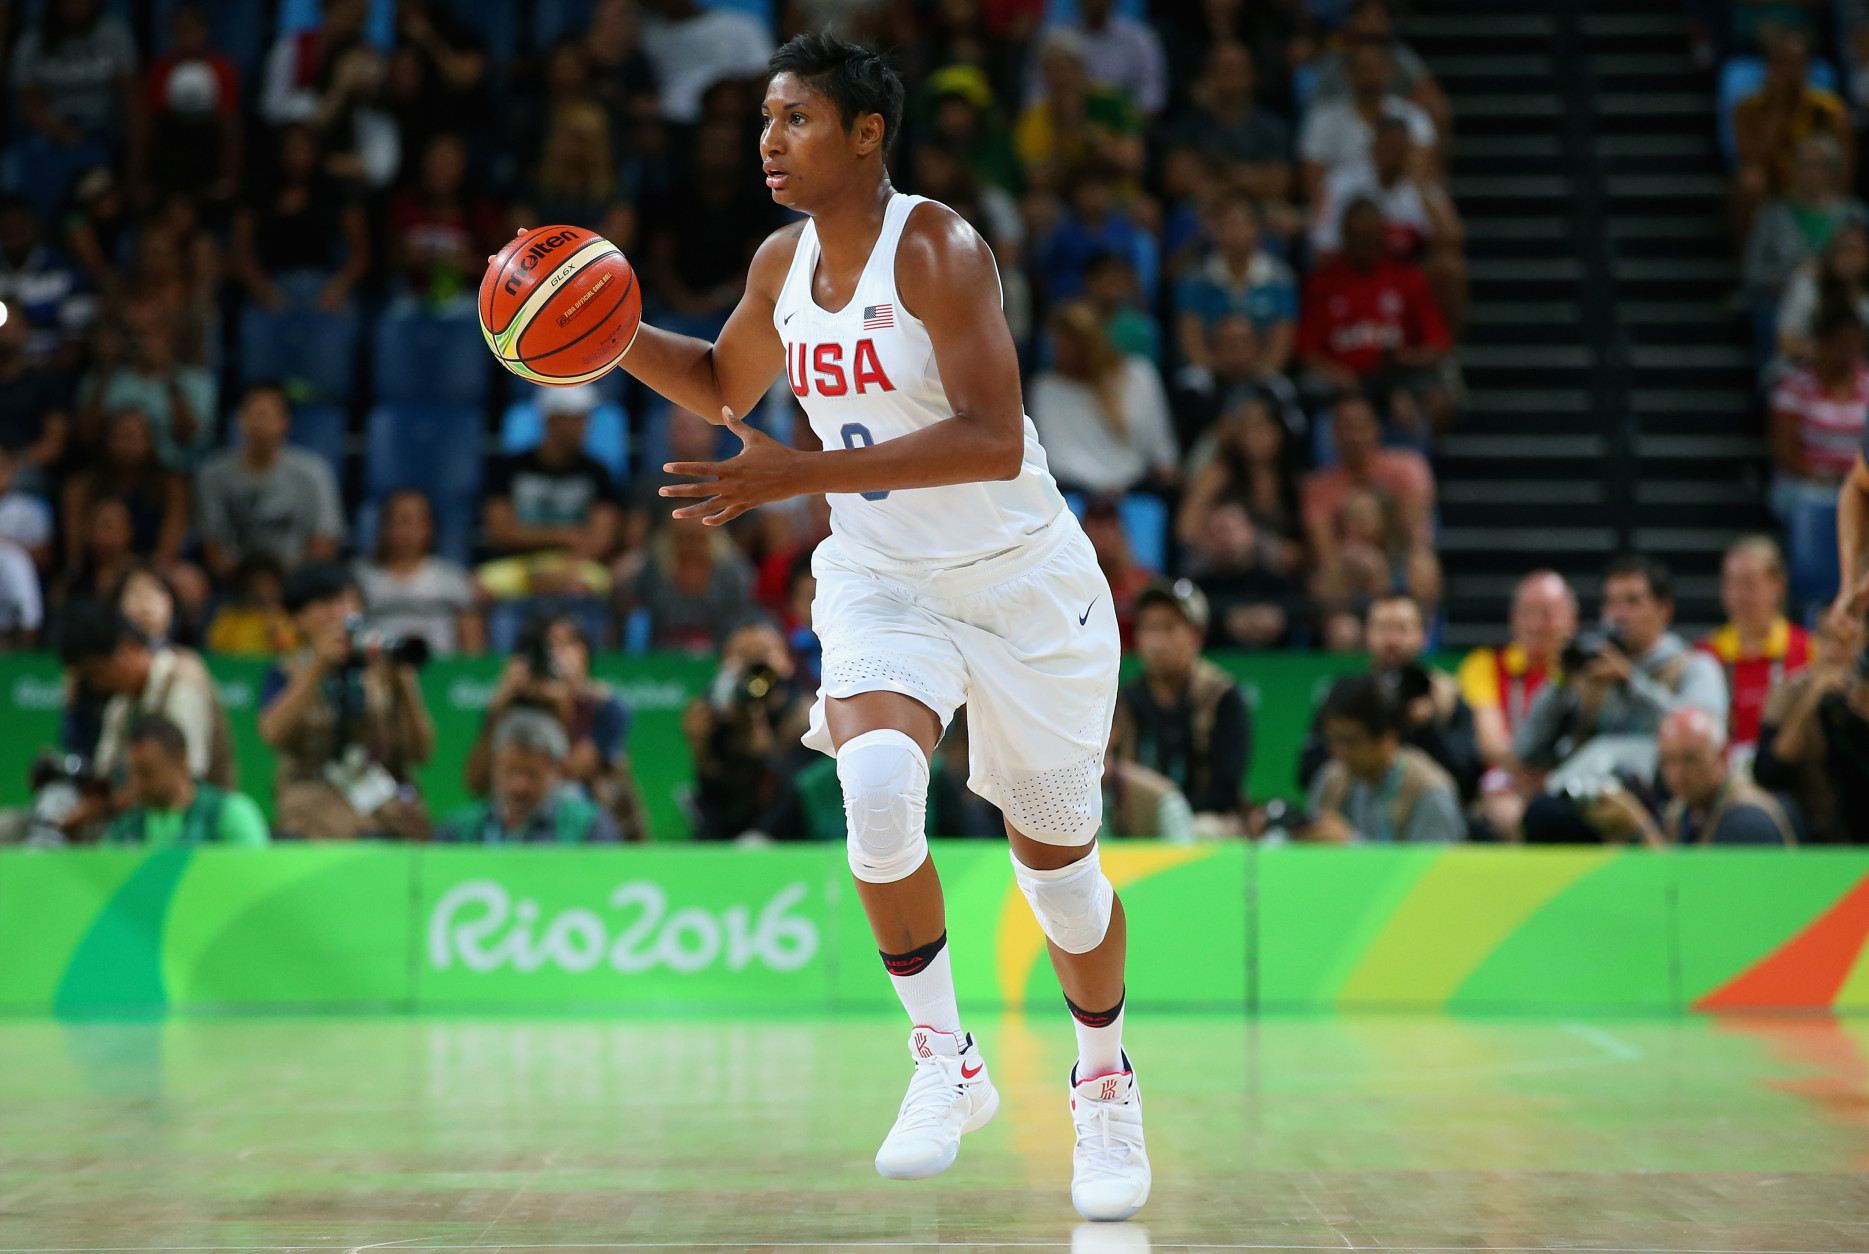 RIO DE JANEIRO, BRAZIL - AUGUST 16:  Angel Mccoughtry #8 of United States controls the ball during the Women's Quarterfinal match against Japan on Day 11 of the Rio 2016 Olympic Games at Carioca Arena 1 on August 16, 2016 in Rio de Janeiro, Brazil.  (Photo by Alex Livesey/Getty Images)